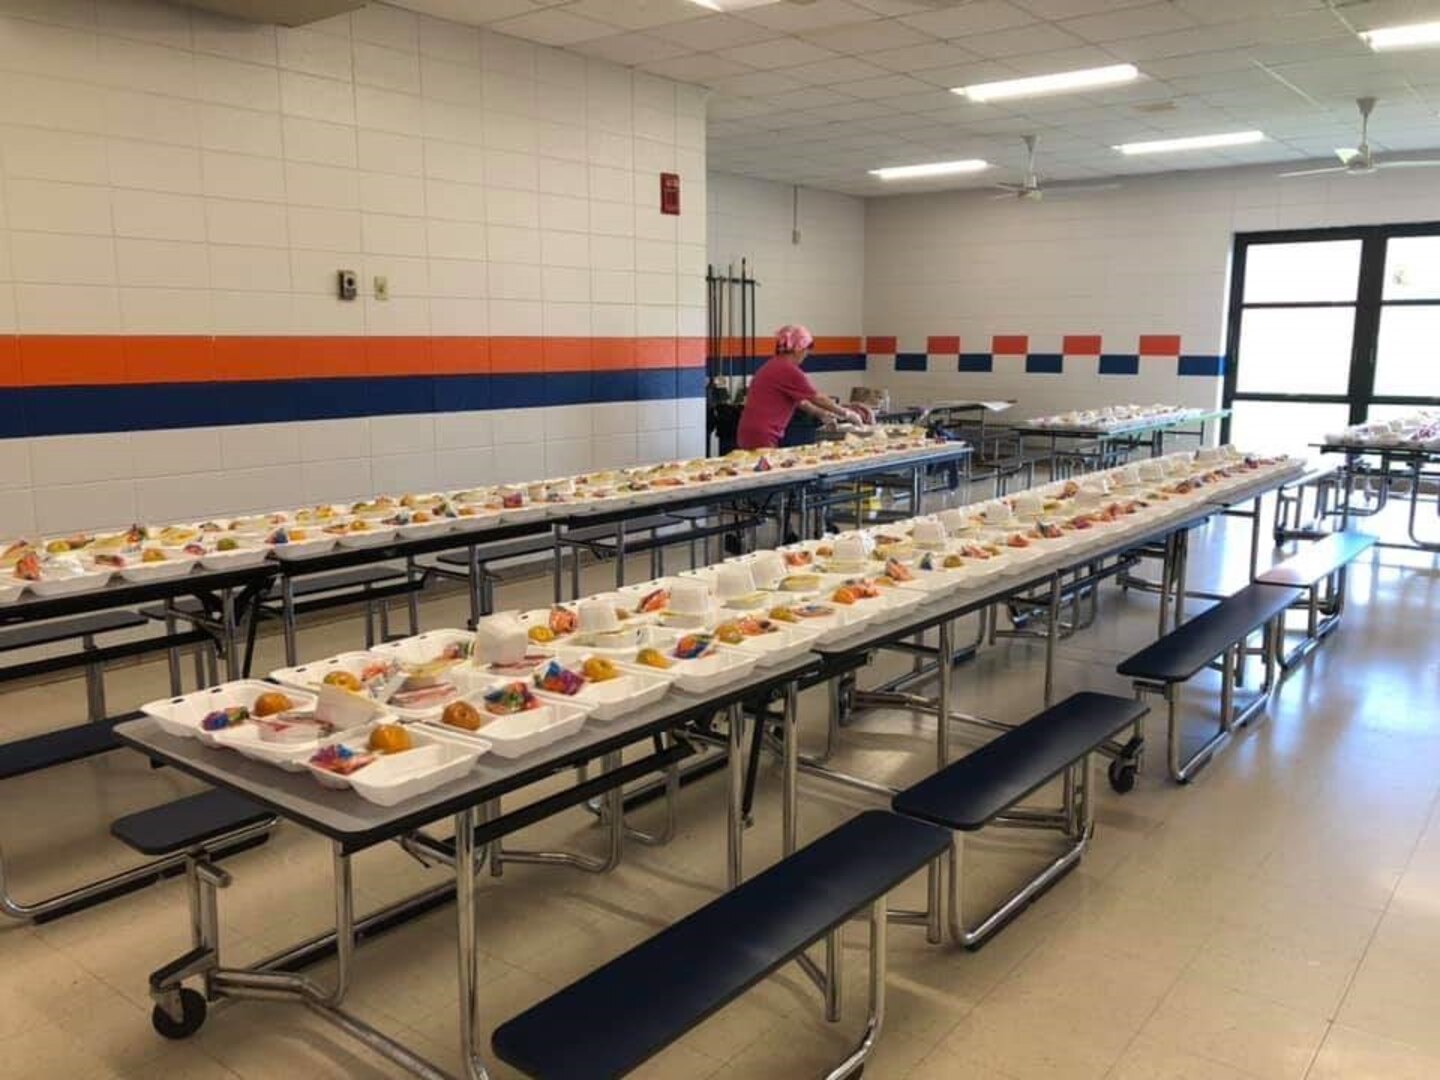 Tables in a school cafeteria are filled with pre-made boxed lunches.